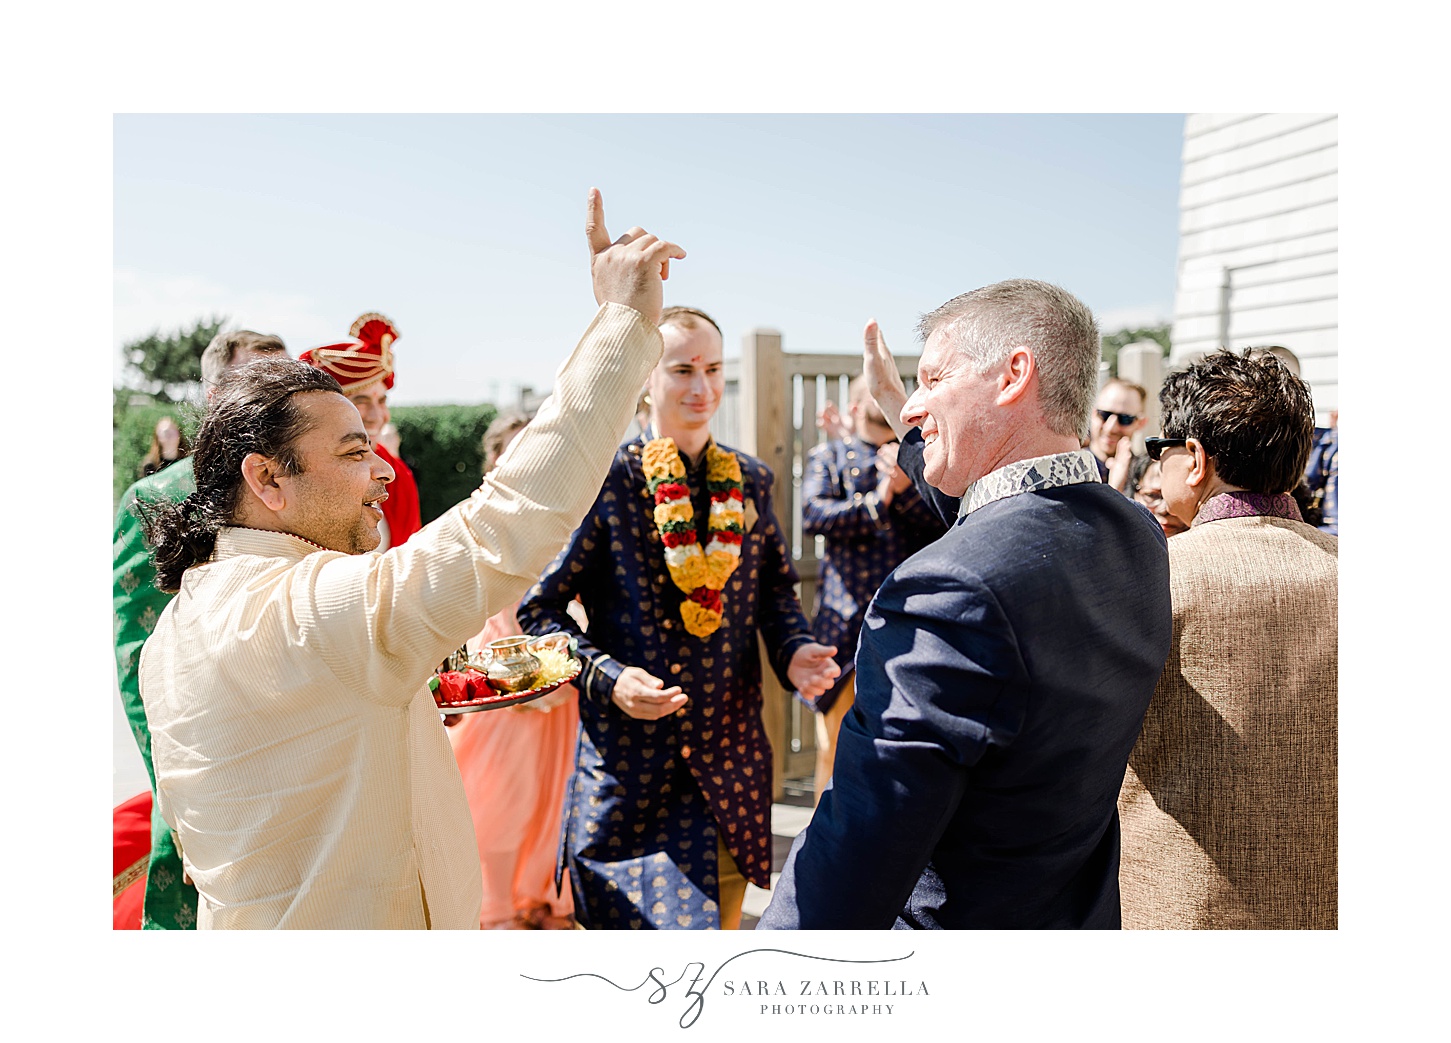 family greets in laws during traditional Indian wedding ceremony at Newport Beach House